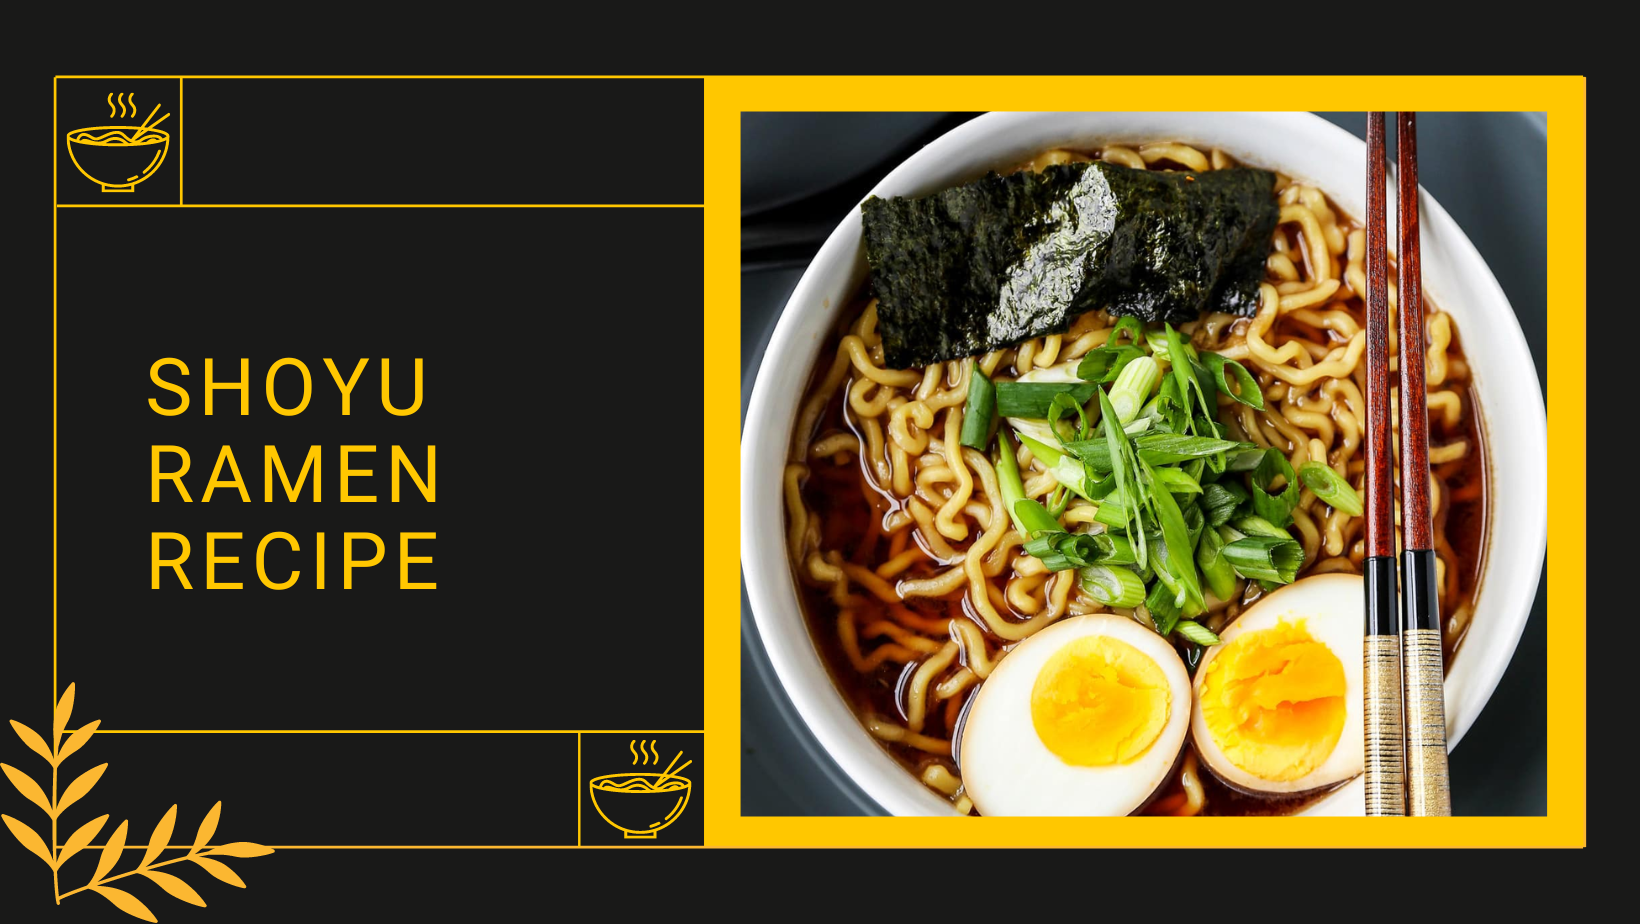 5 Best Quick & Easy Ramen Recipes You Can Make At Home